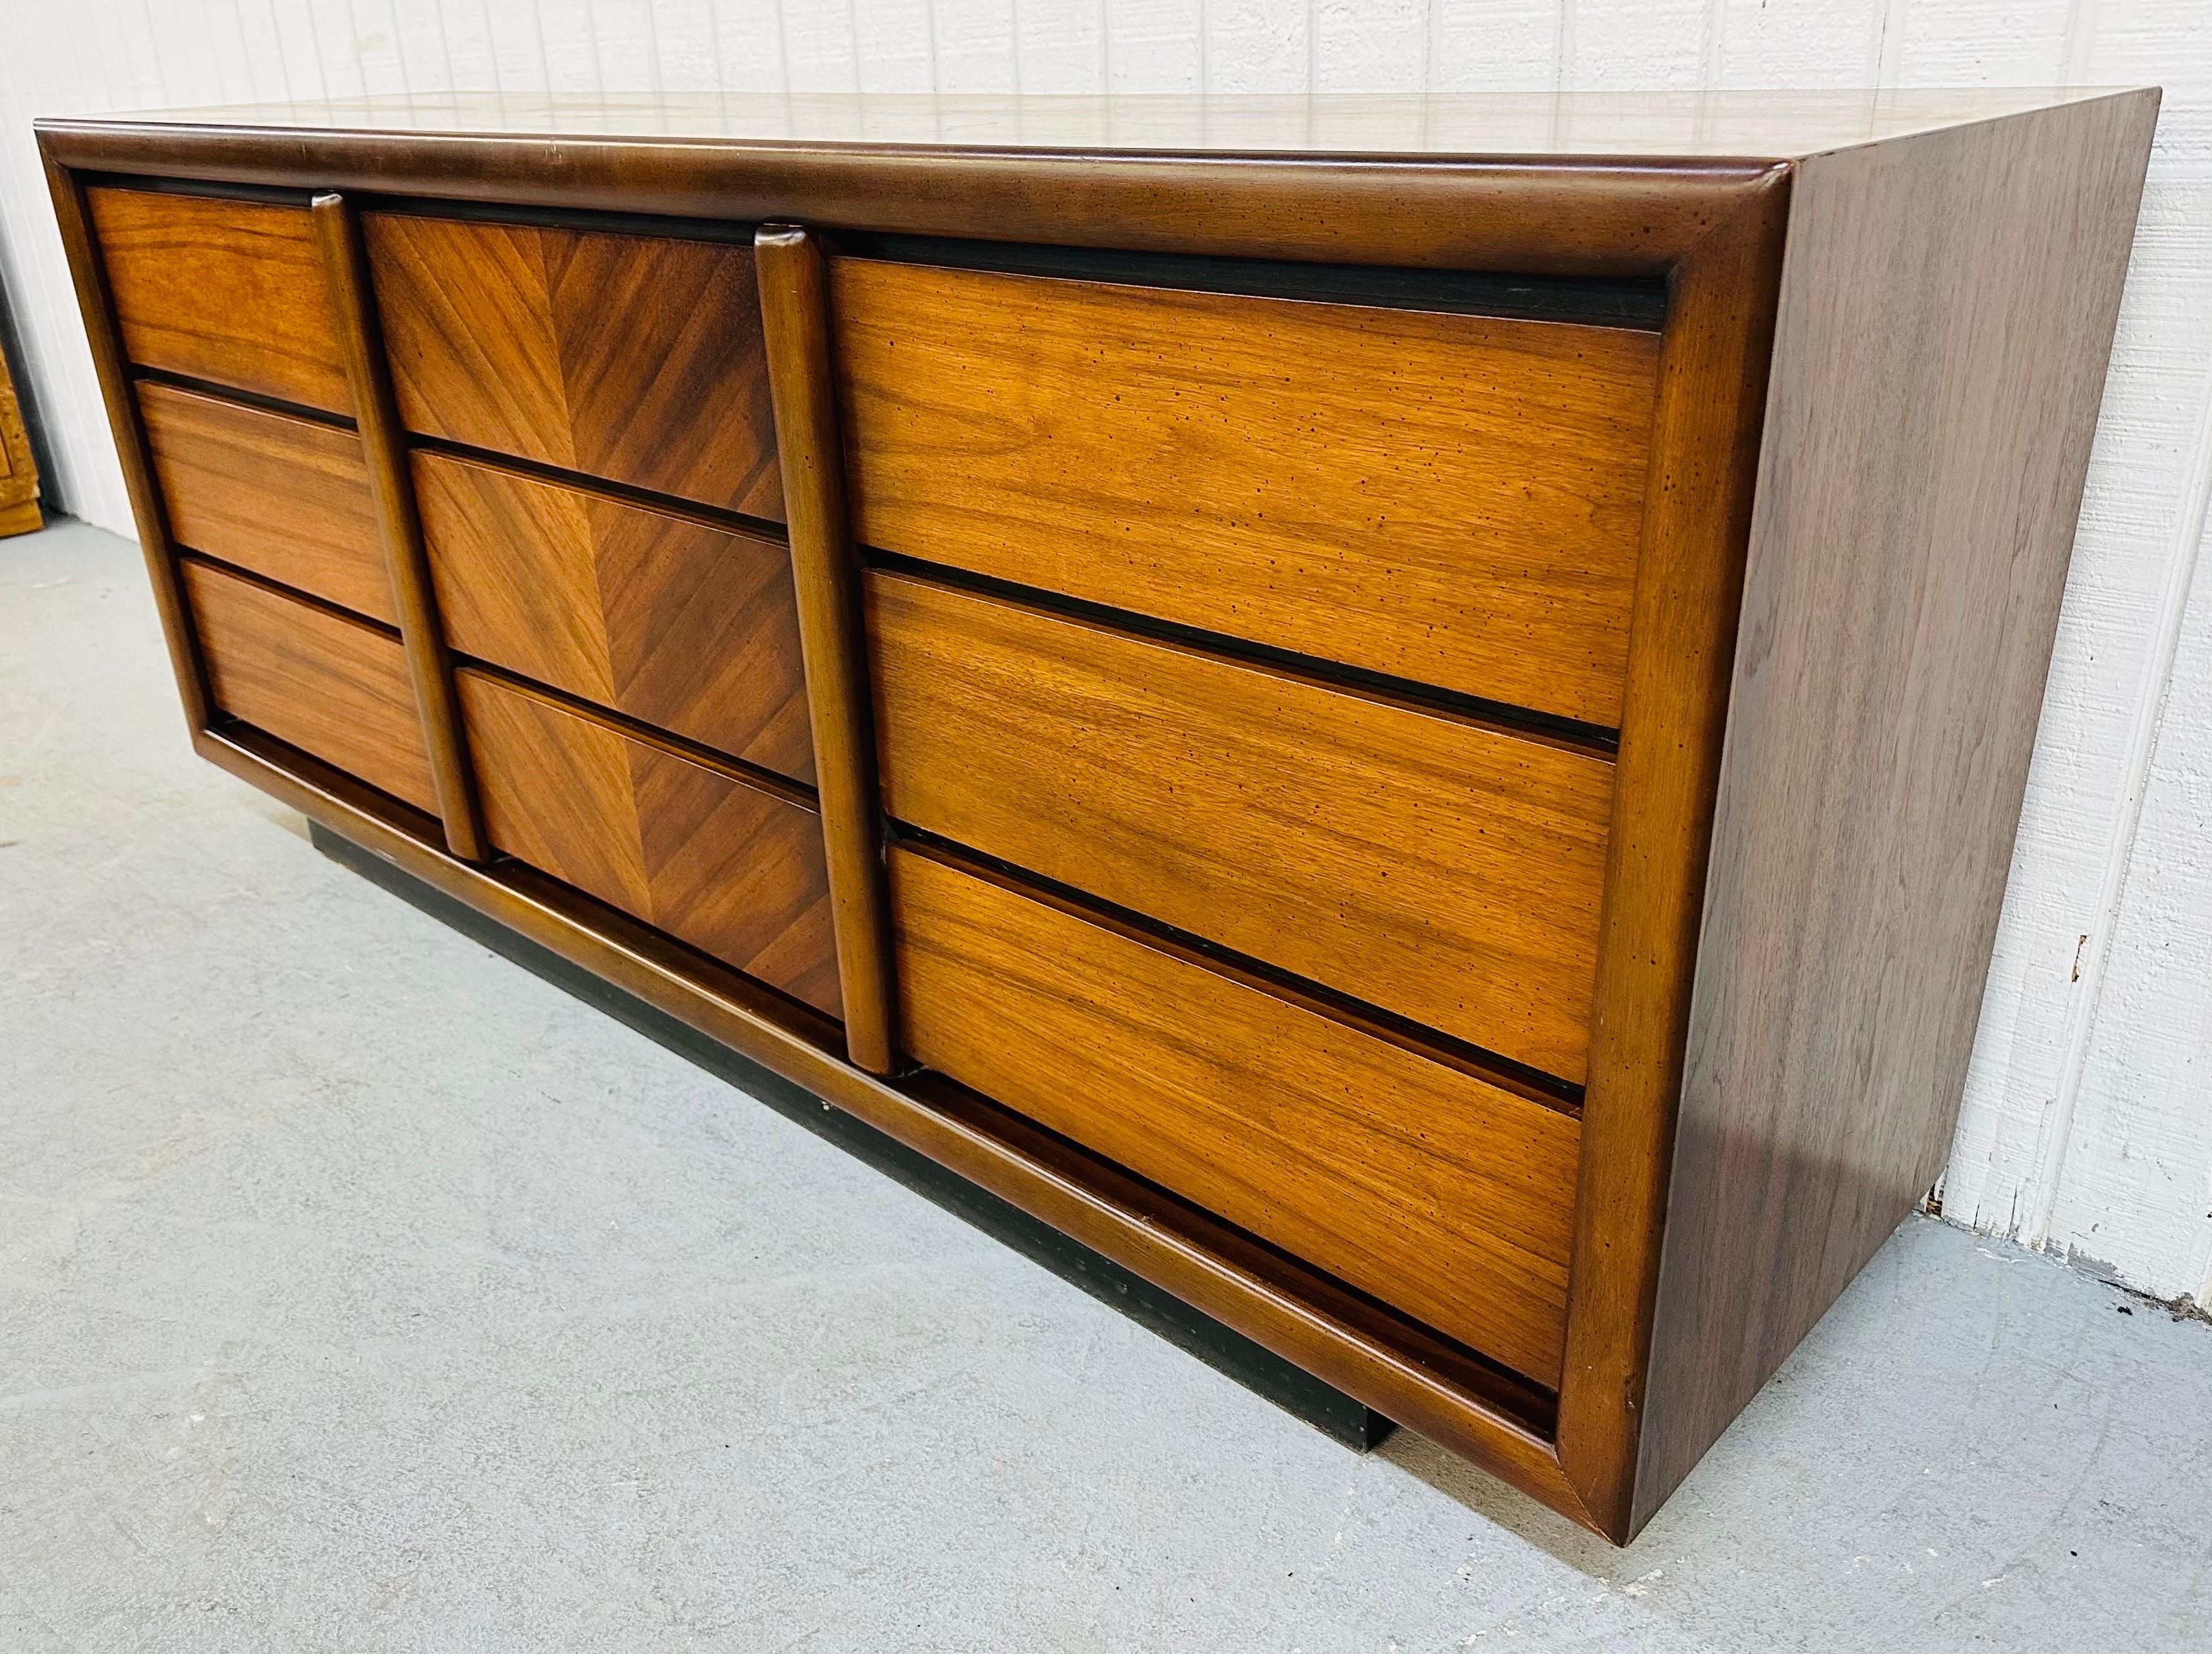 This listing is for a Mid-Century Modern Lane Walnut 9-Drawer Dresser. Featuring nine evenly sized drawers for storage, black plinth base, and beautiful walnut finish. This is an exceptional combination of quality and design by Lane.